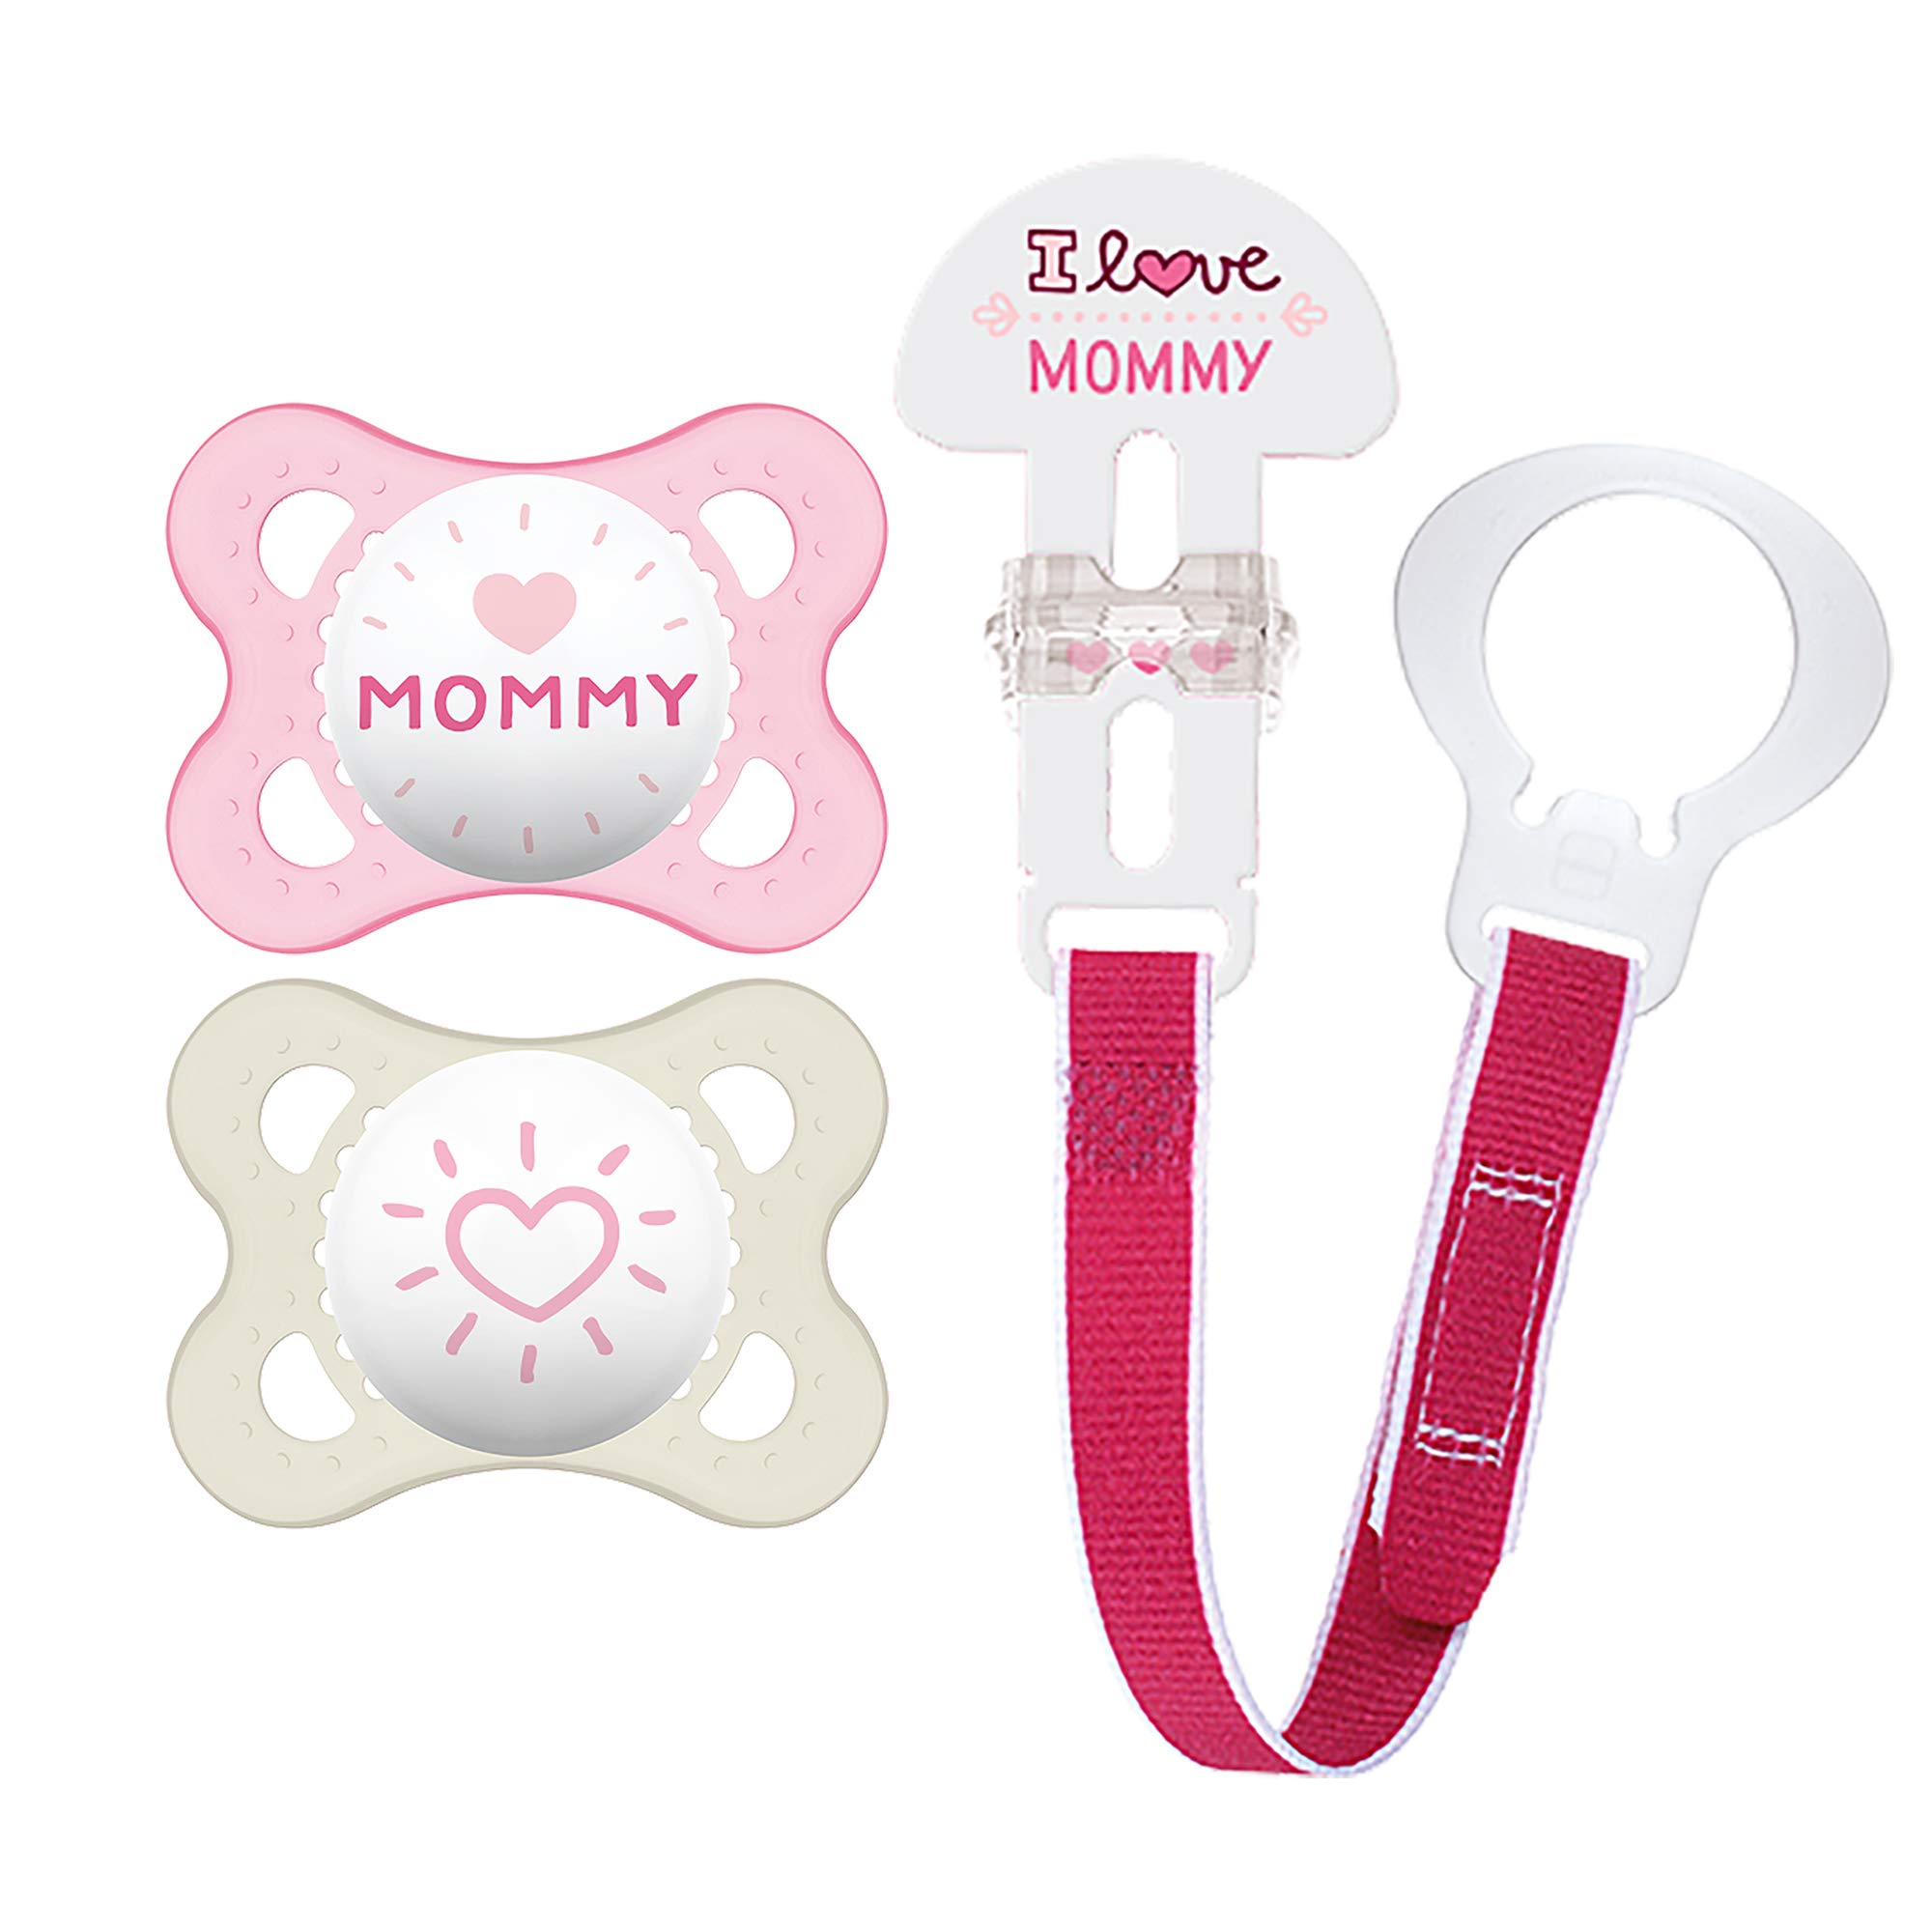 Book Cover MAM Original Value Pack Baby Pacifier, Nipple Shape Helps Promote Healthy Oral Development, Universal Pacifier Clip, 2 Pacifiers + 1 Pacifier Clip, 0-6 Months, Love & Affection/Girl 'I Love Mommy' Girl 2 Pacifiers + Clip